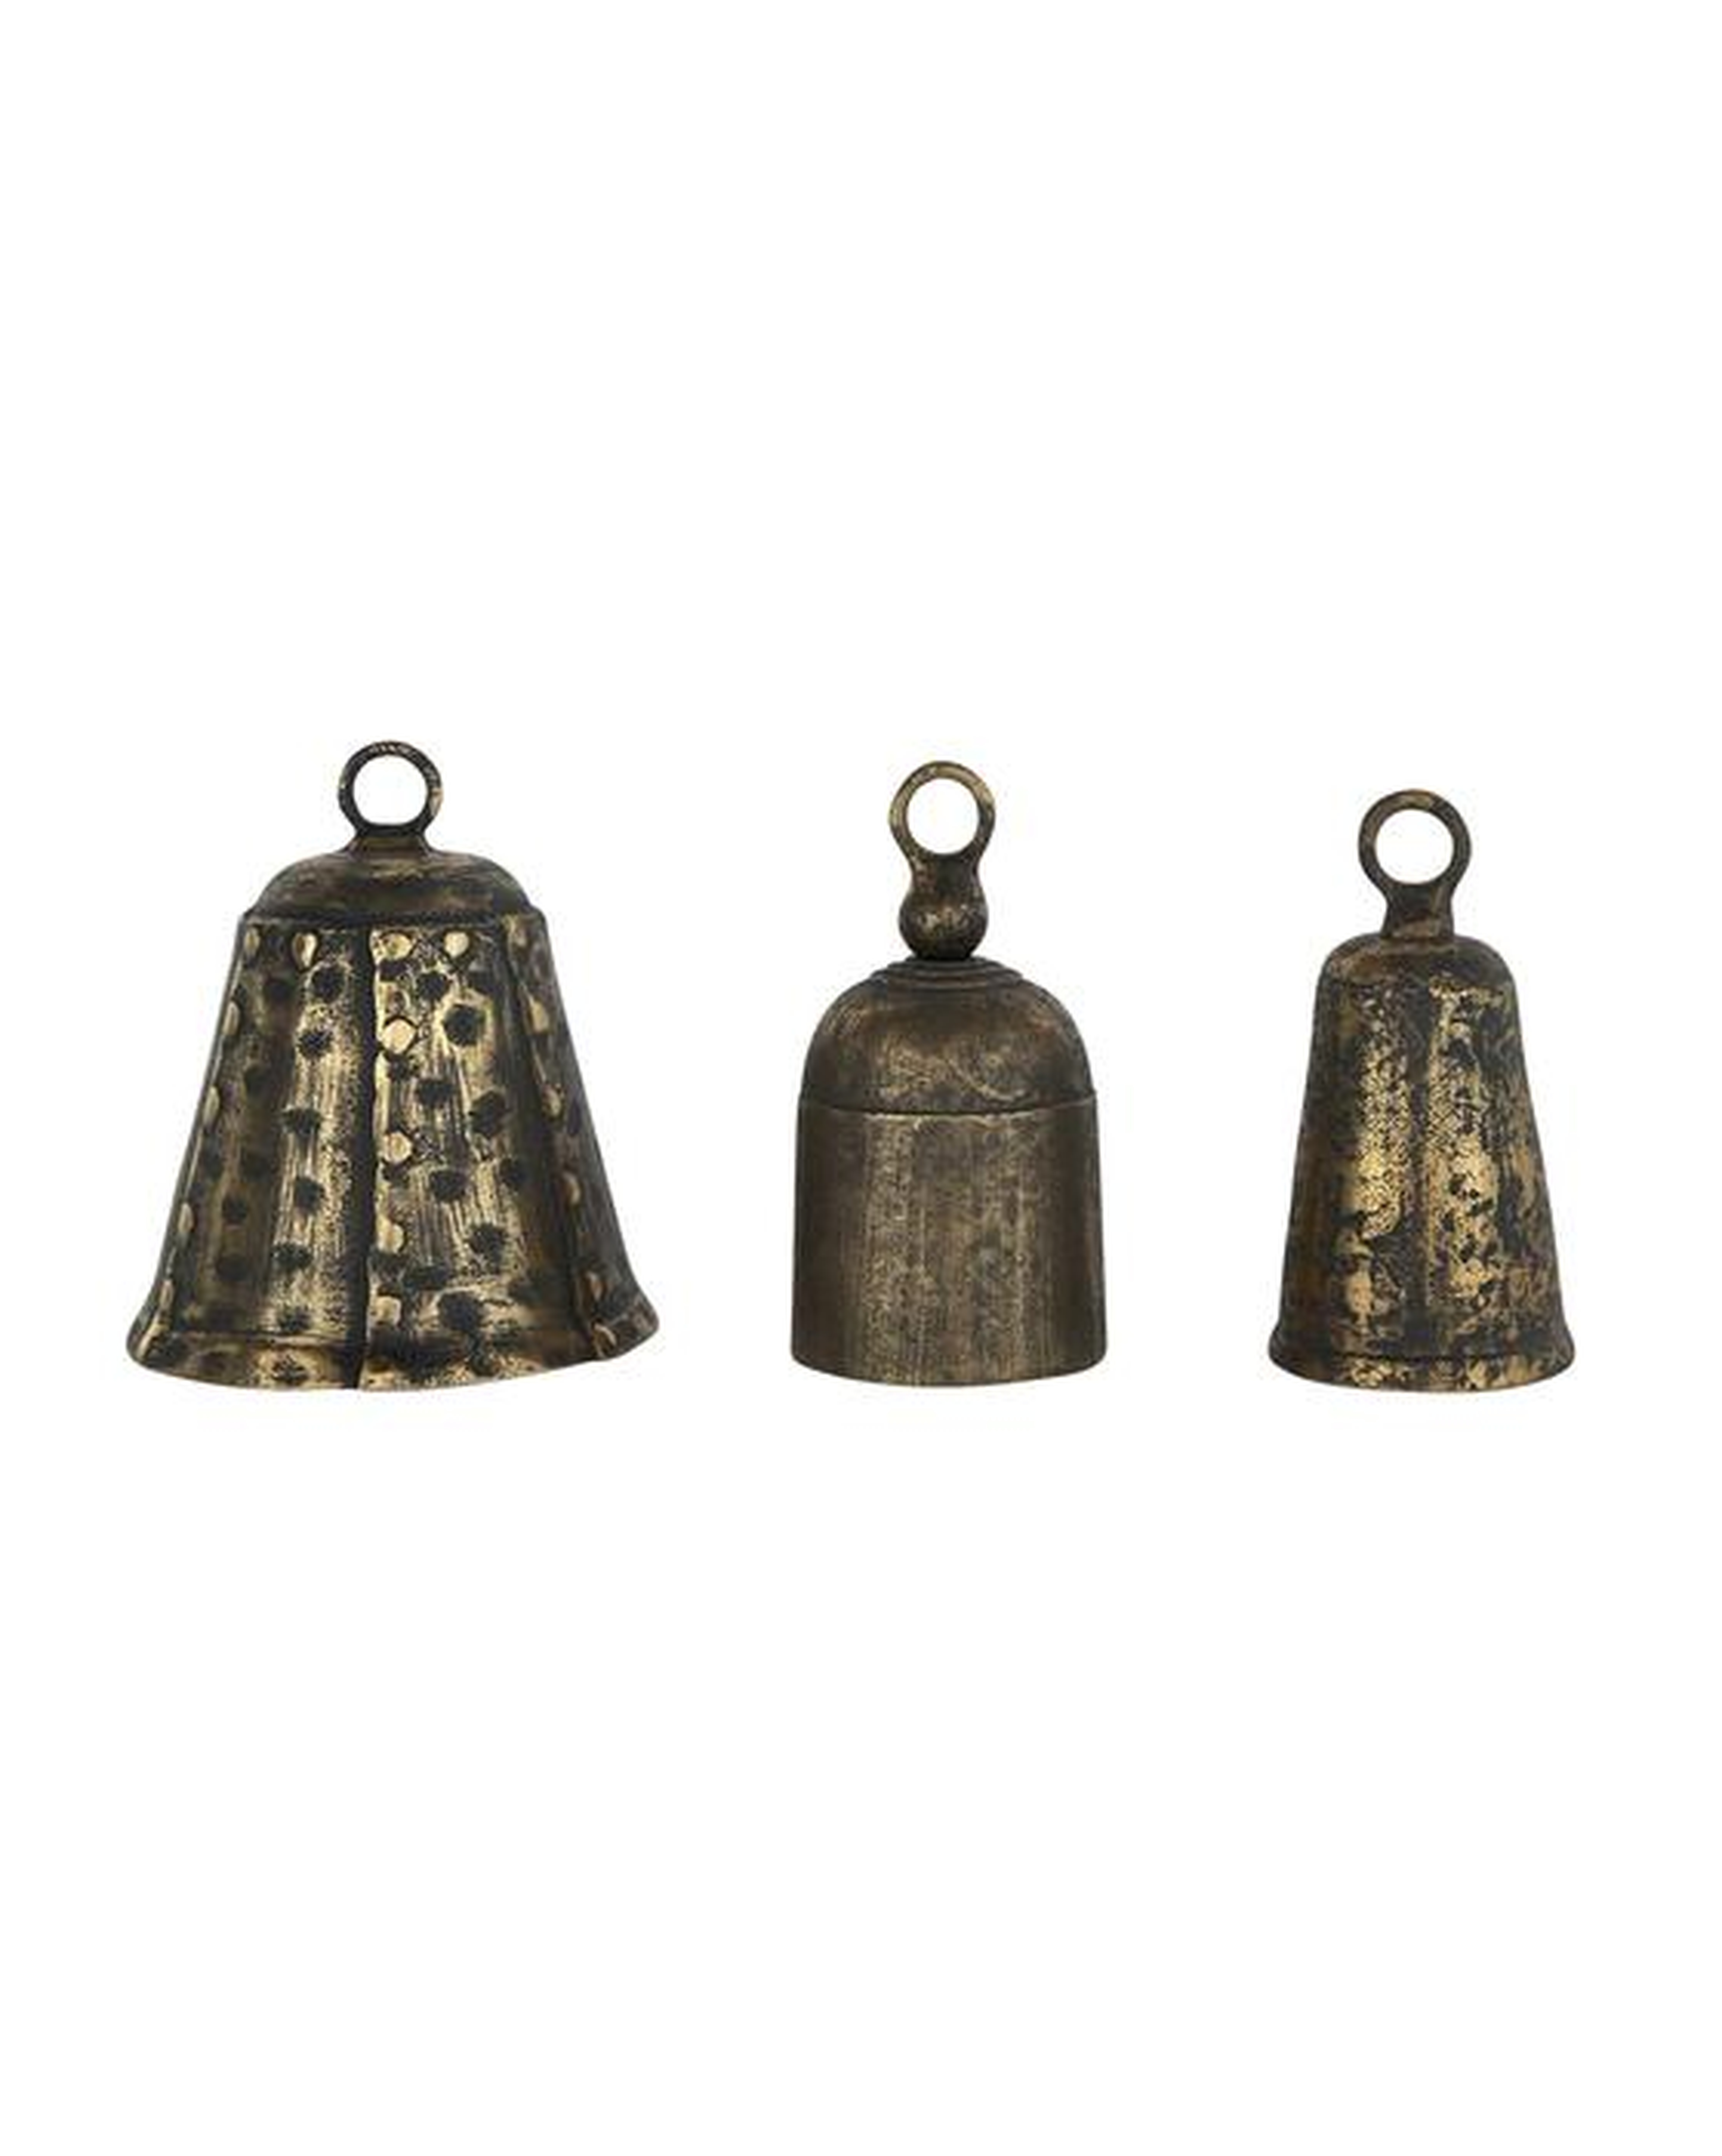 Aged Brass Bells (Set of 3) - McGee & Co.